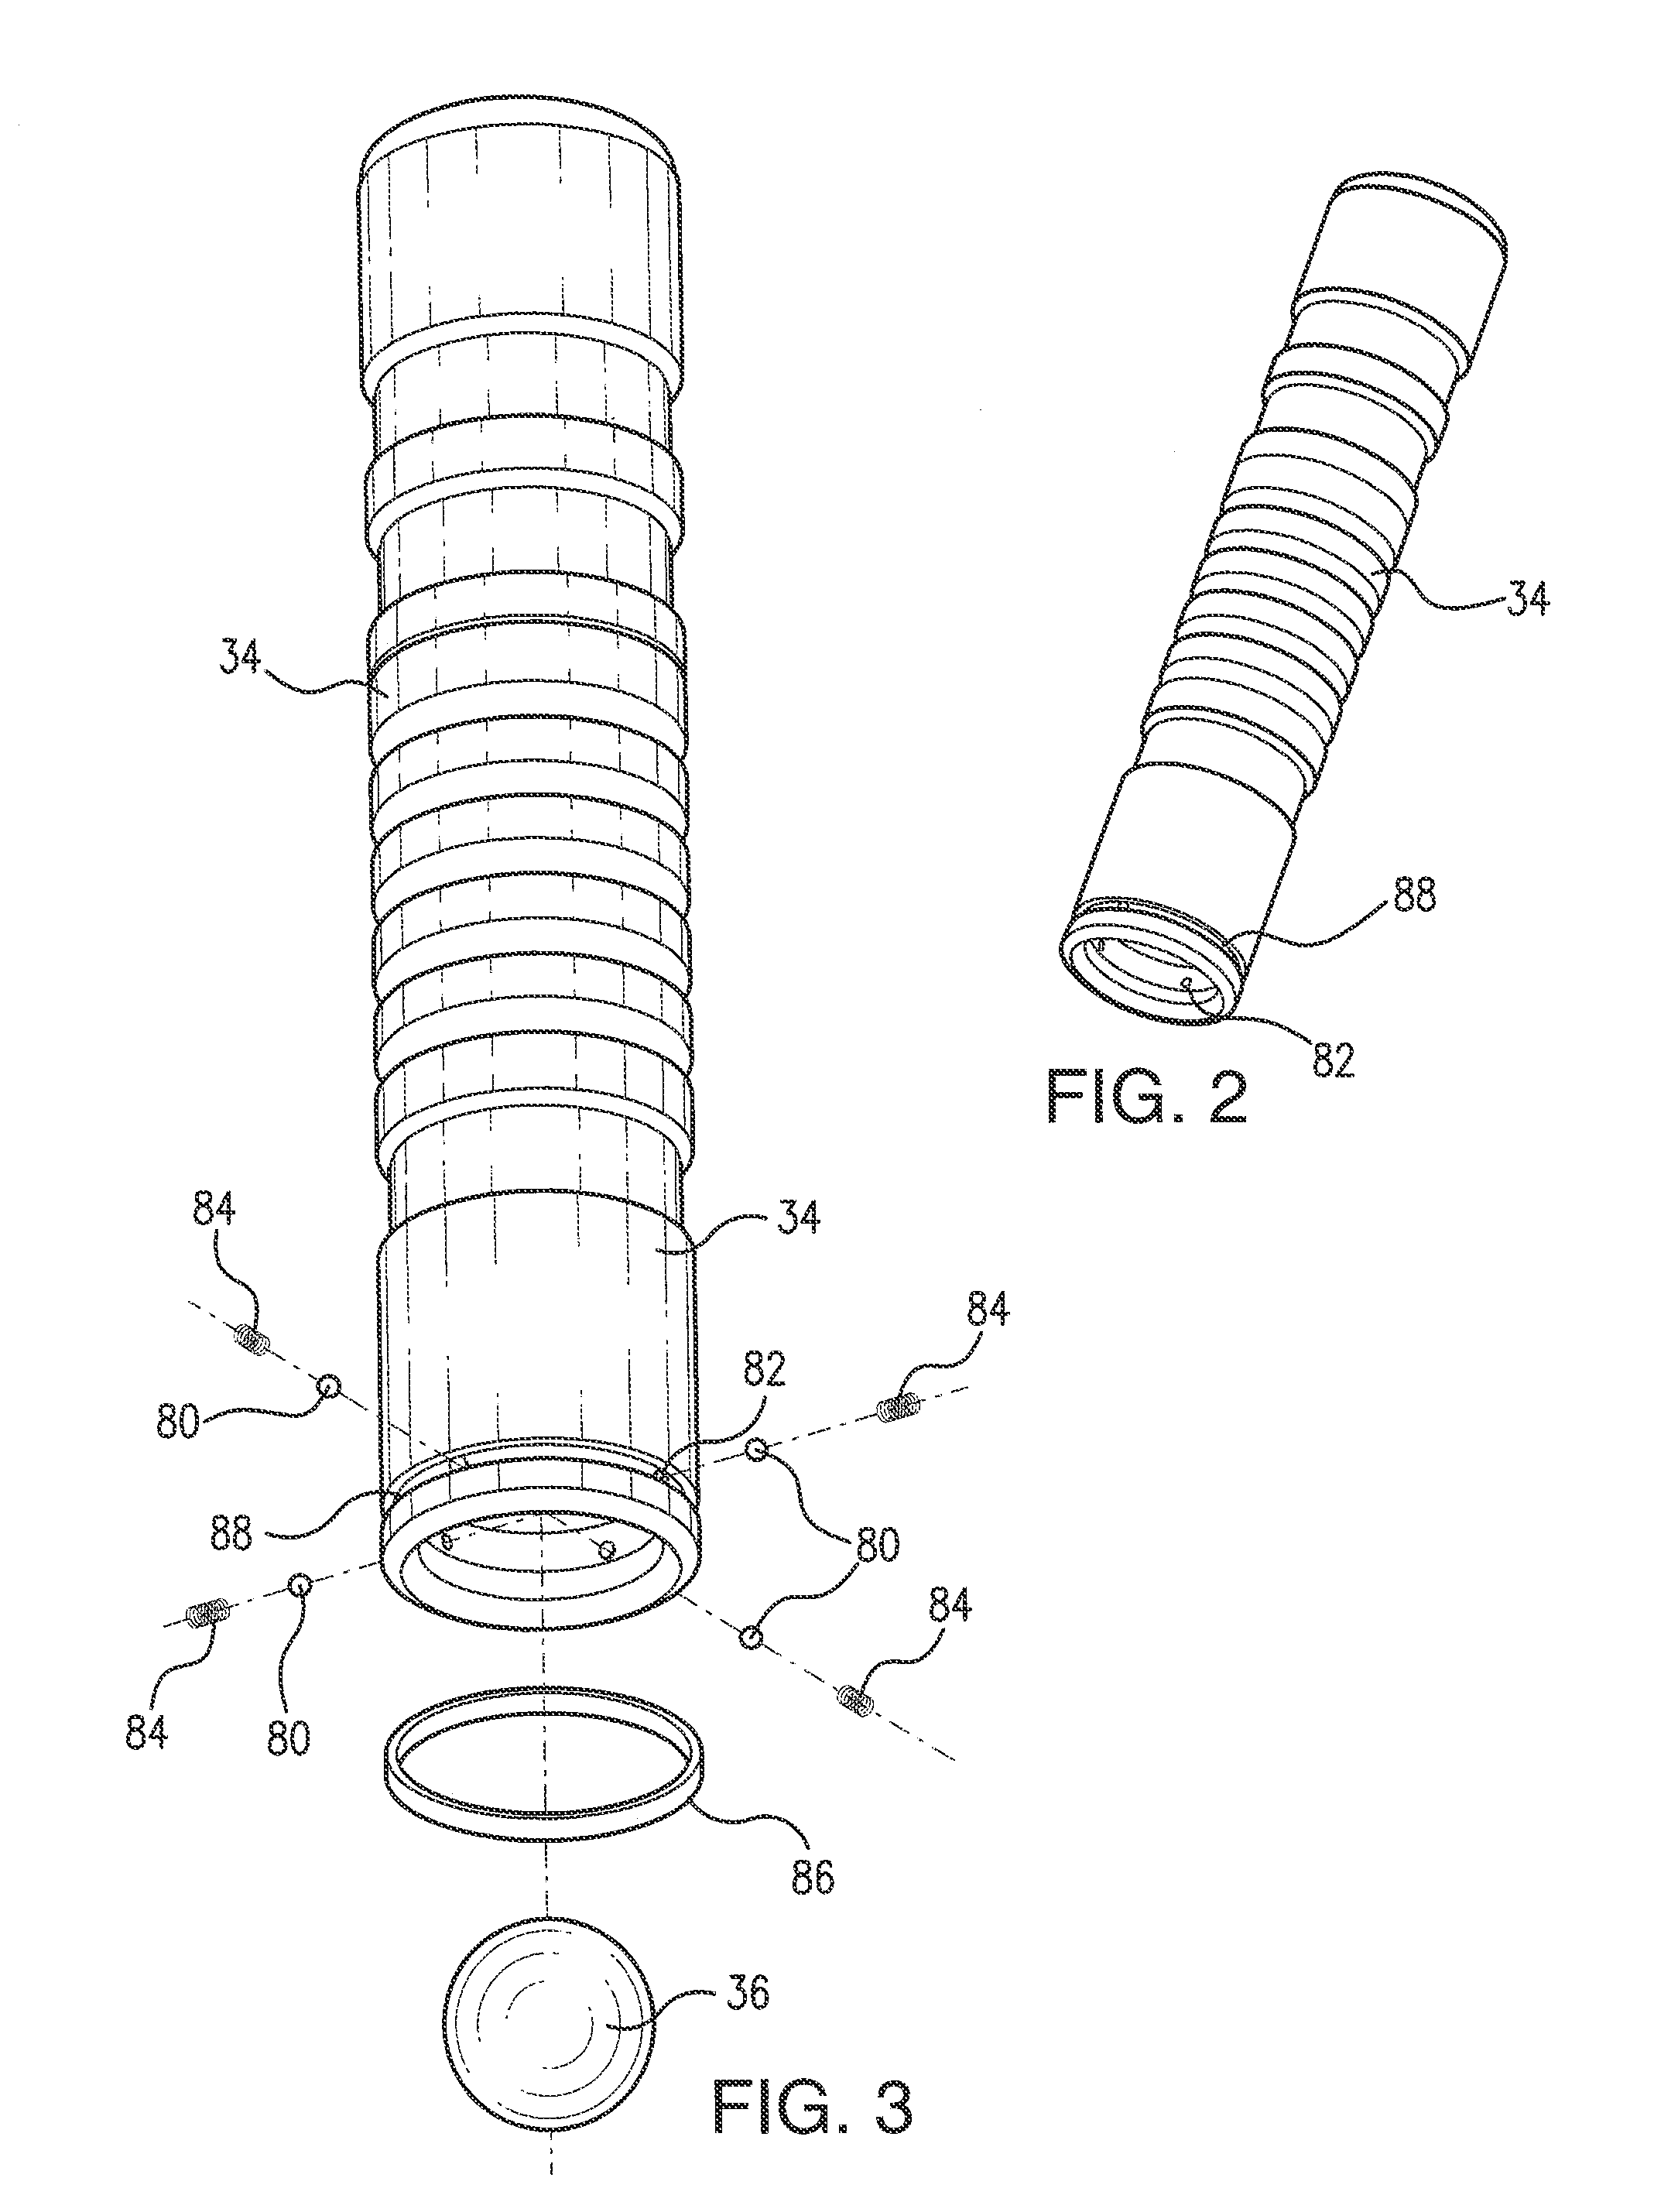 Plunger lift assembly with an improved free piston assembly